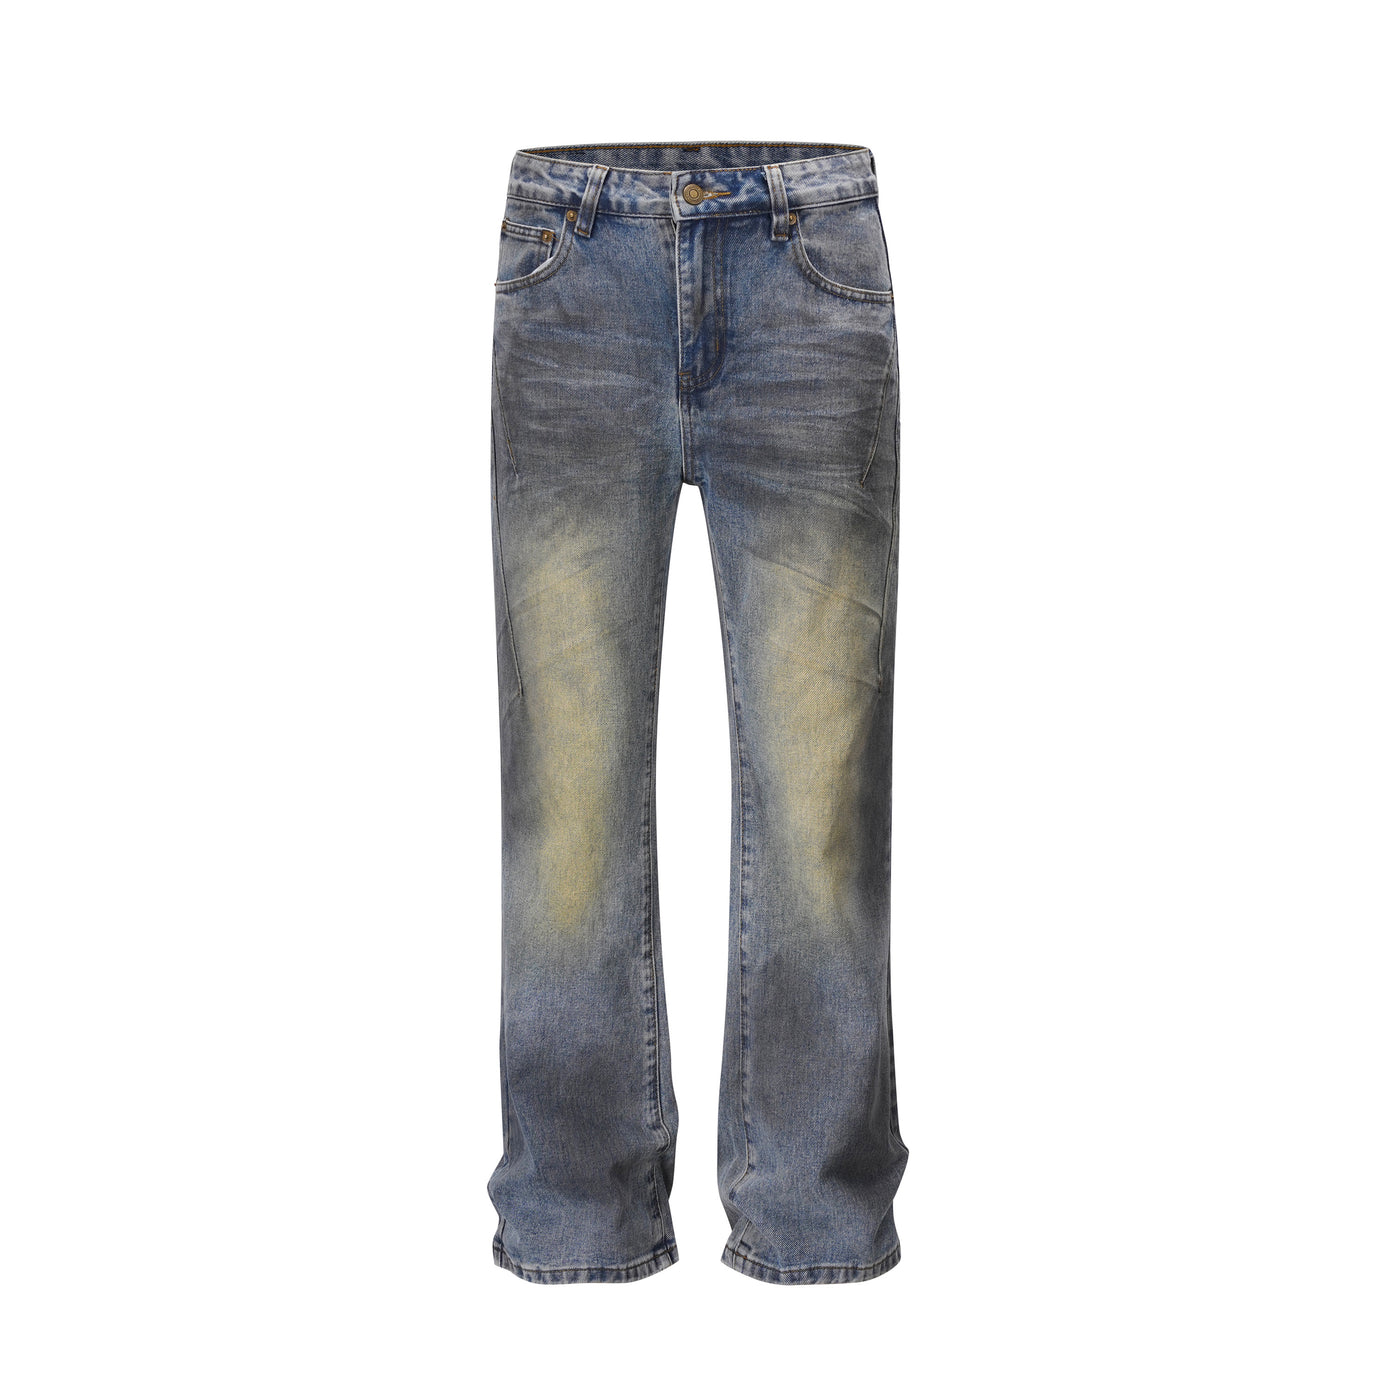 F3F Select Dirty Dyed Denim Jeans